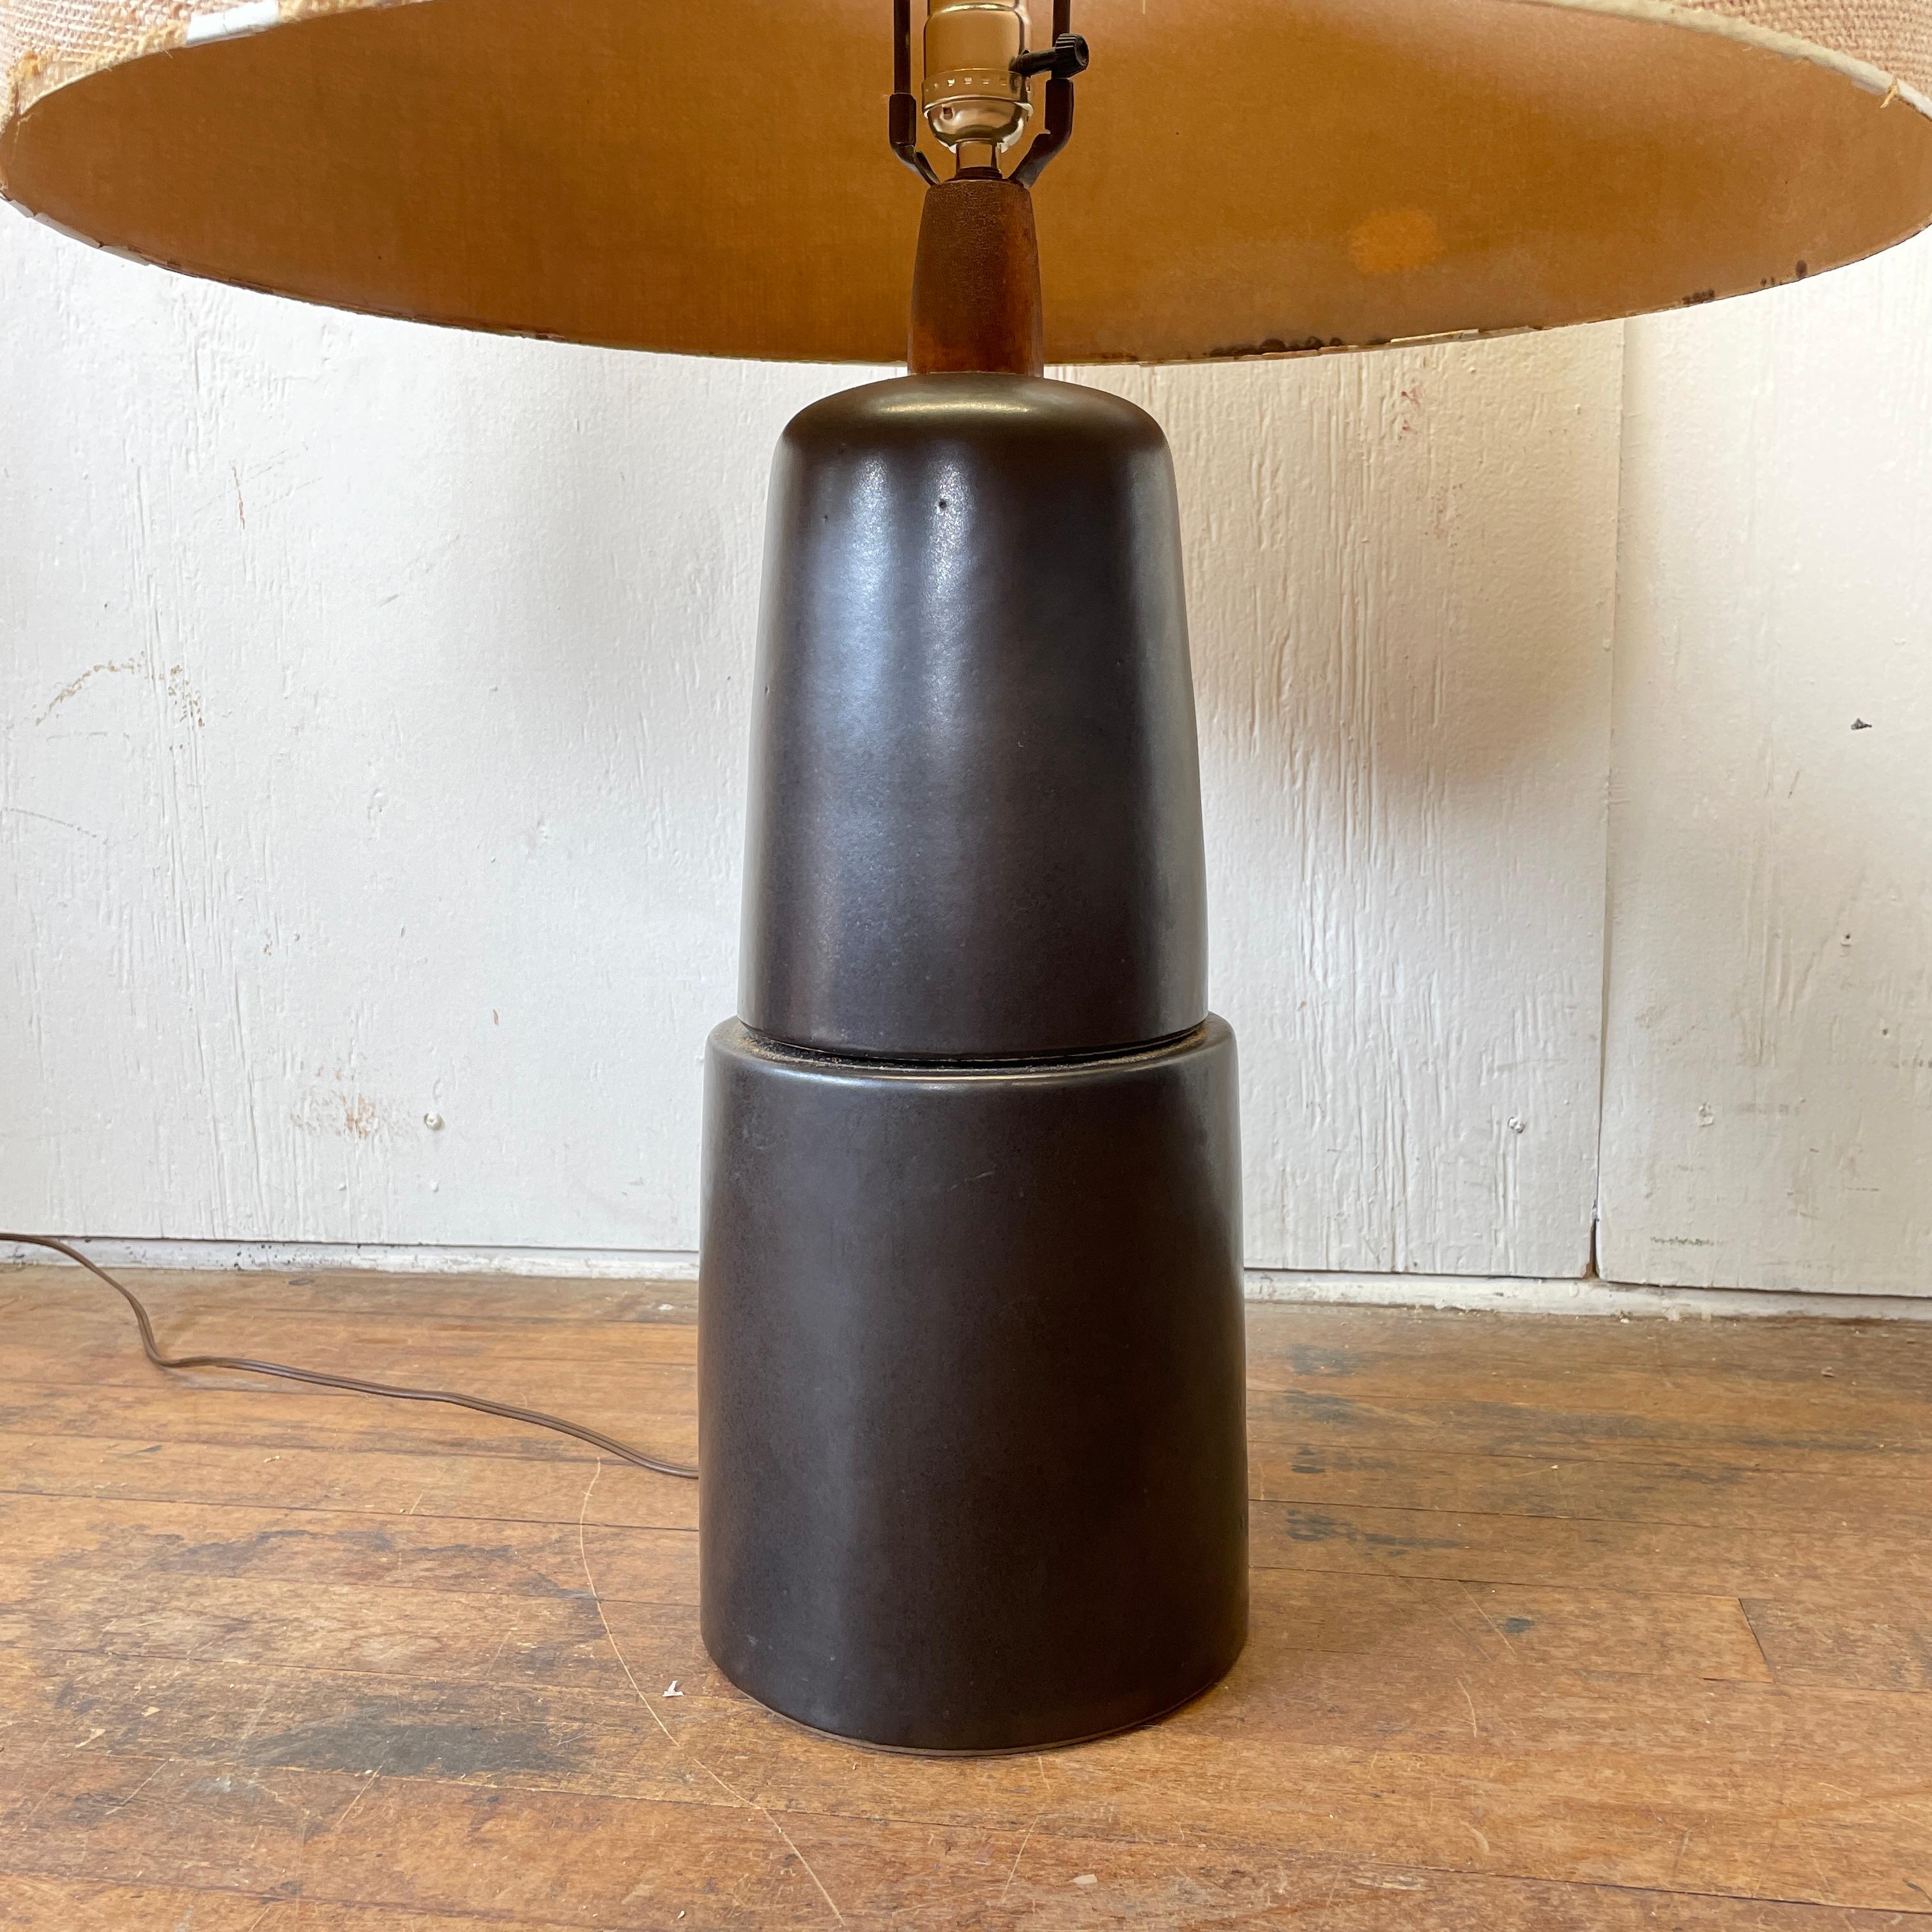 A rare, vintage Martz Marshall Studios pottery table lamp with original shade and finial. Martz is an iconic mainstay of mid-century modern design and this lamp is a fine example of the studio's work with a large shade and original paper tag. 

No